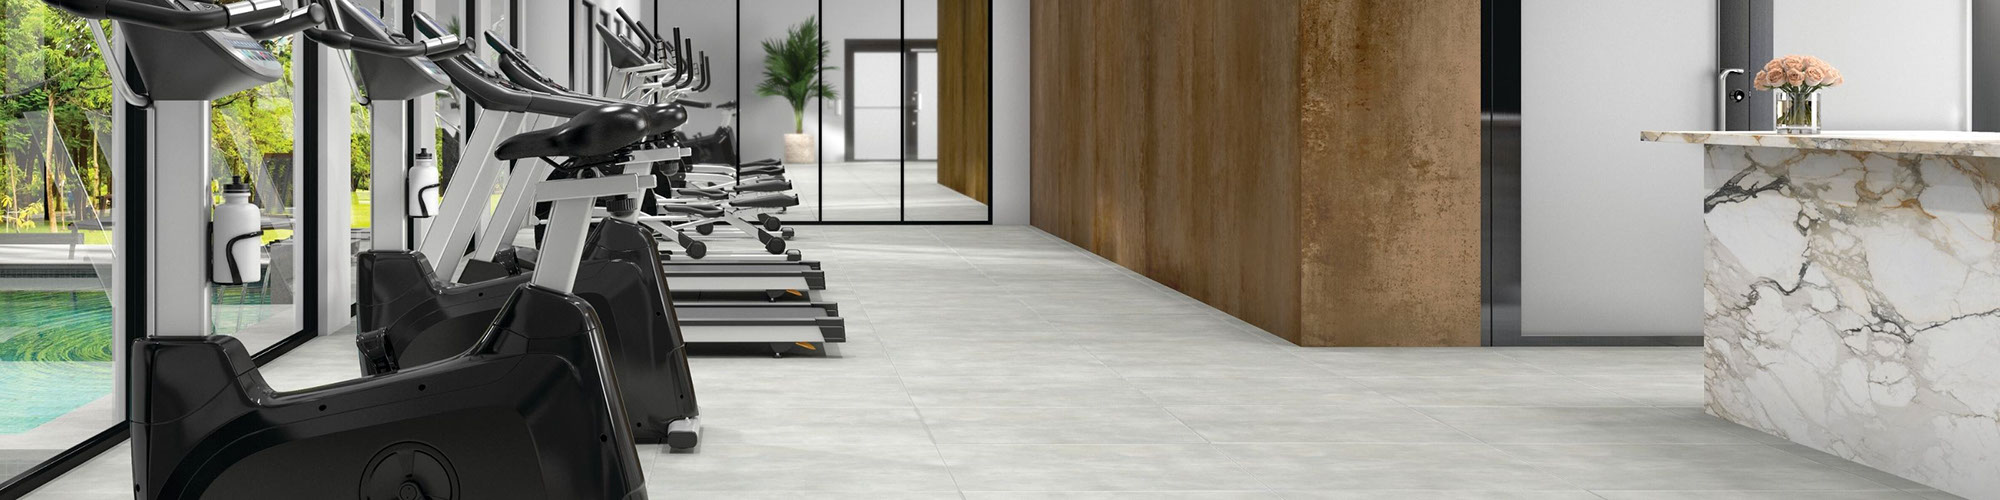 Hotel gym with a row of treadmills and stationary bicycles, stone look gray tile floor, metal look bronze wall tile, and white & gray marble look porcelain slab countertop.